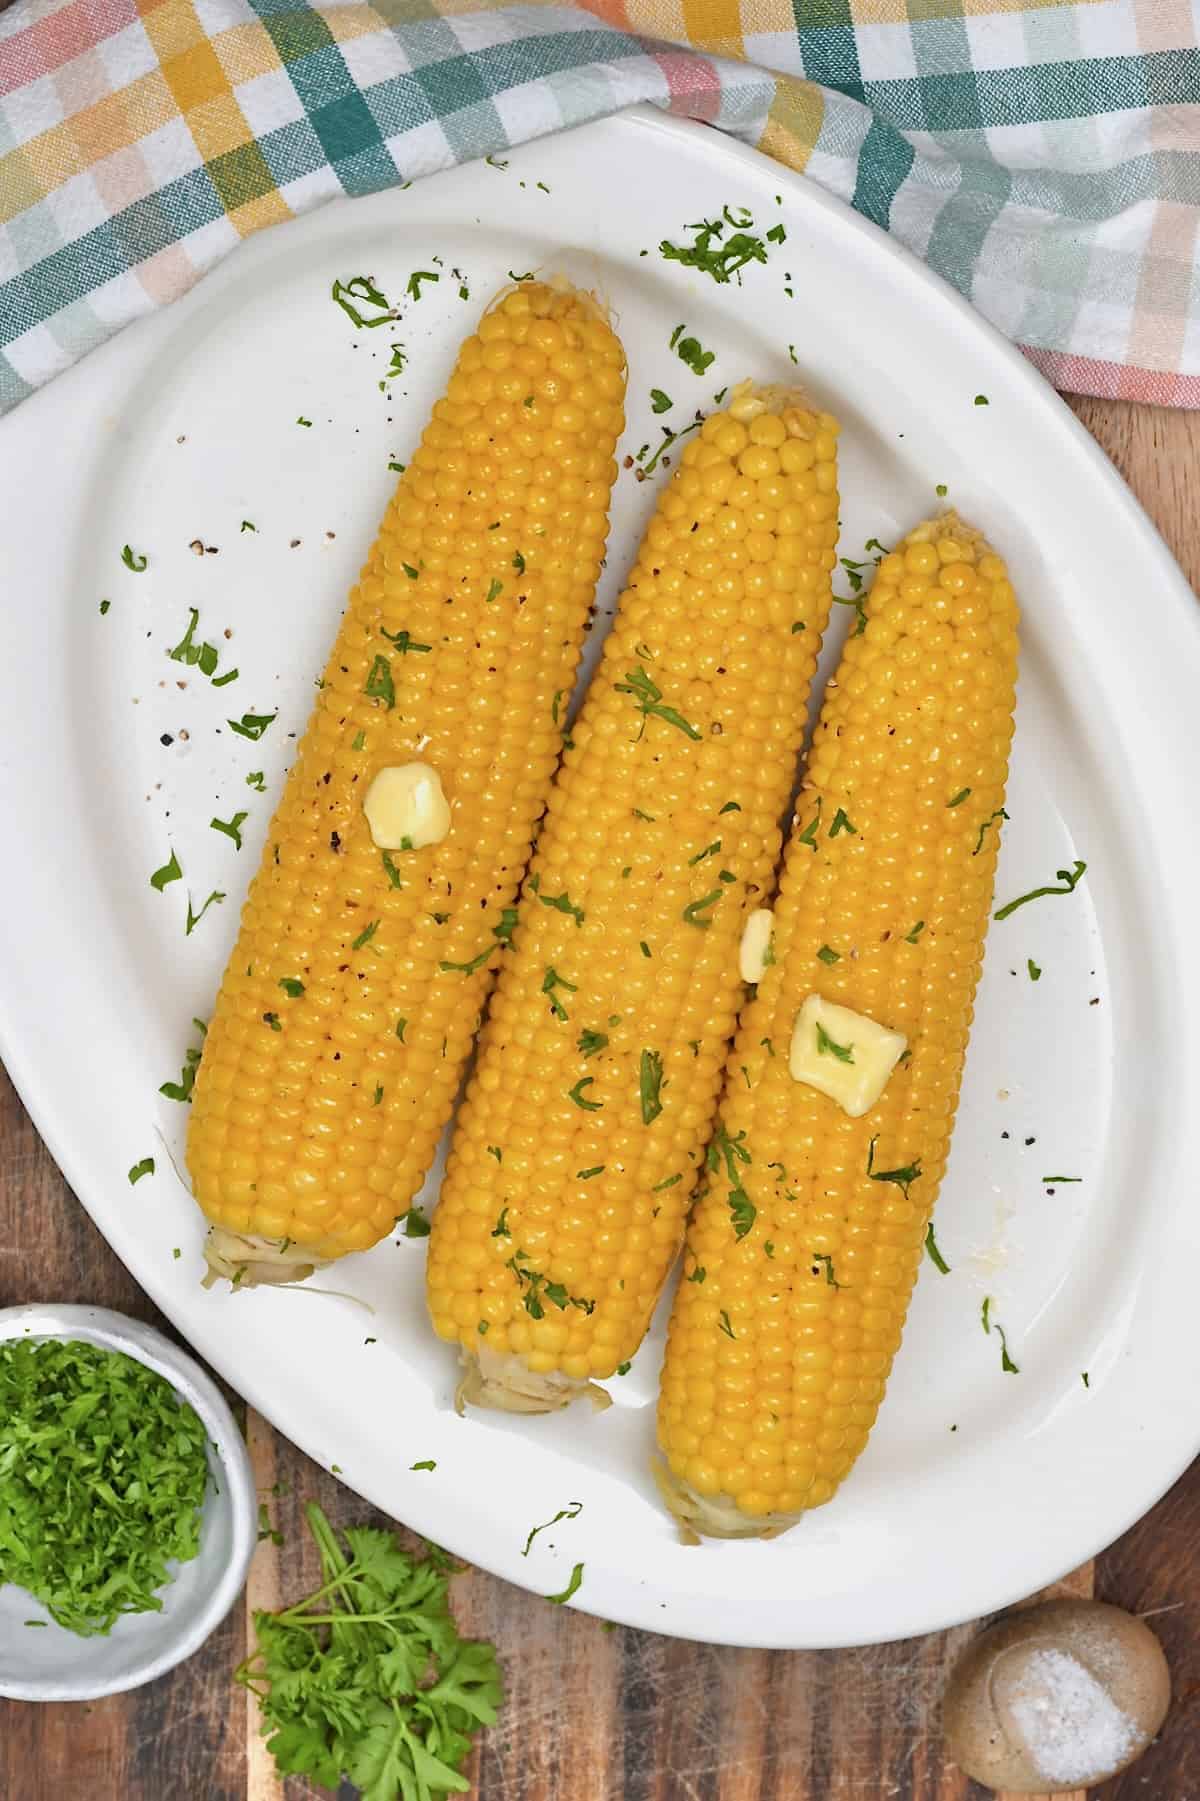 Boiled corn on the cob topped with butter and herbs